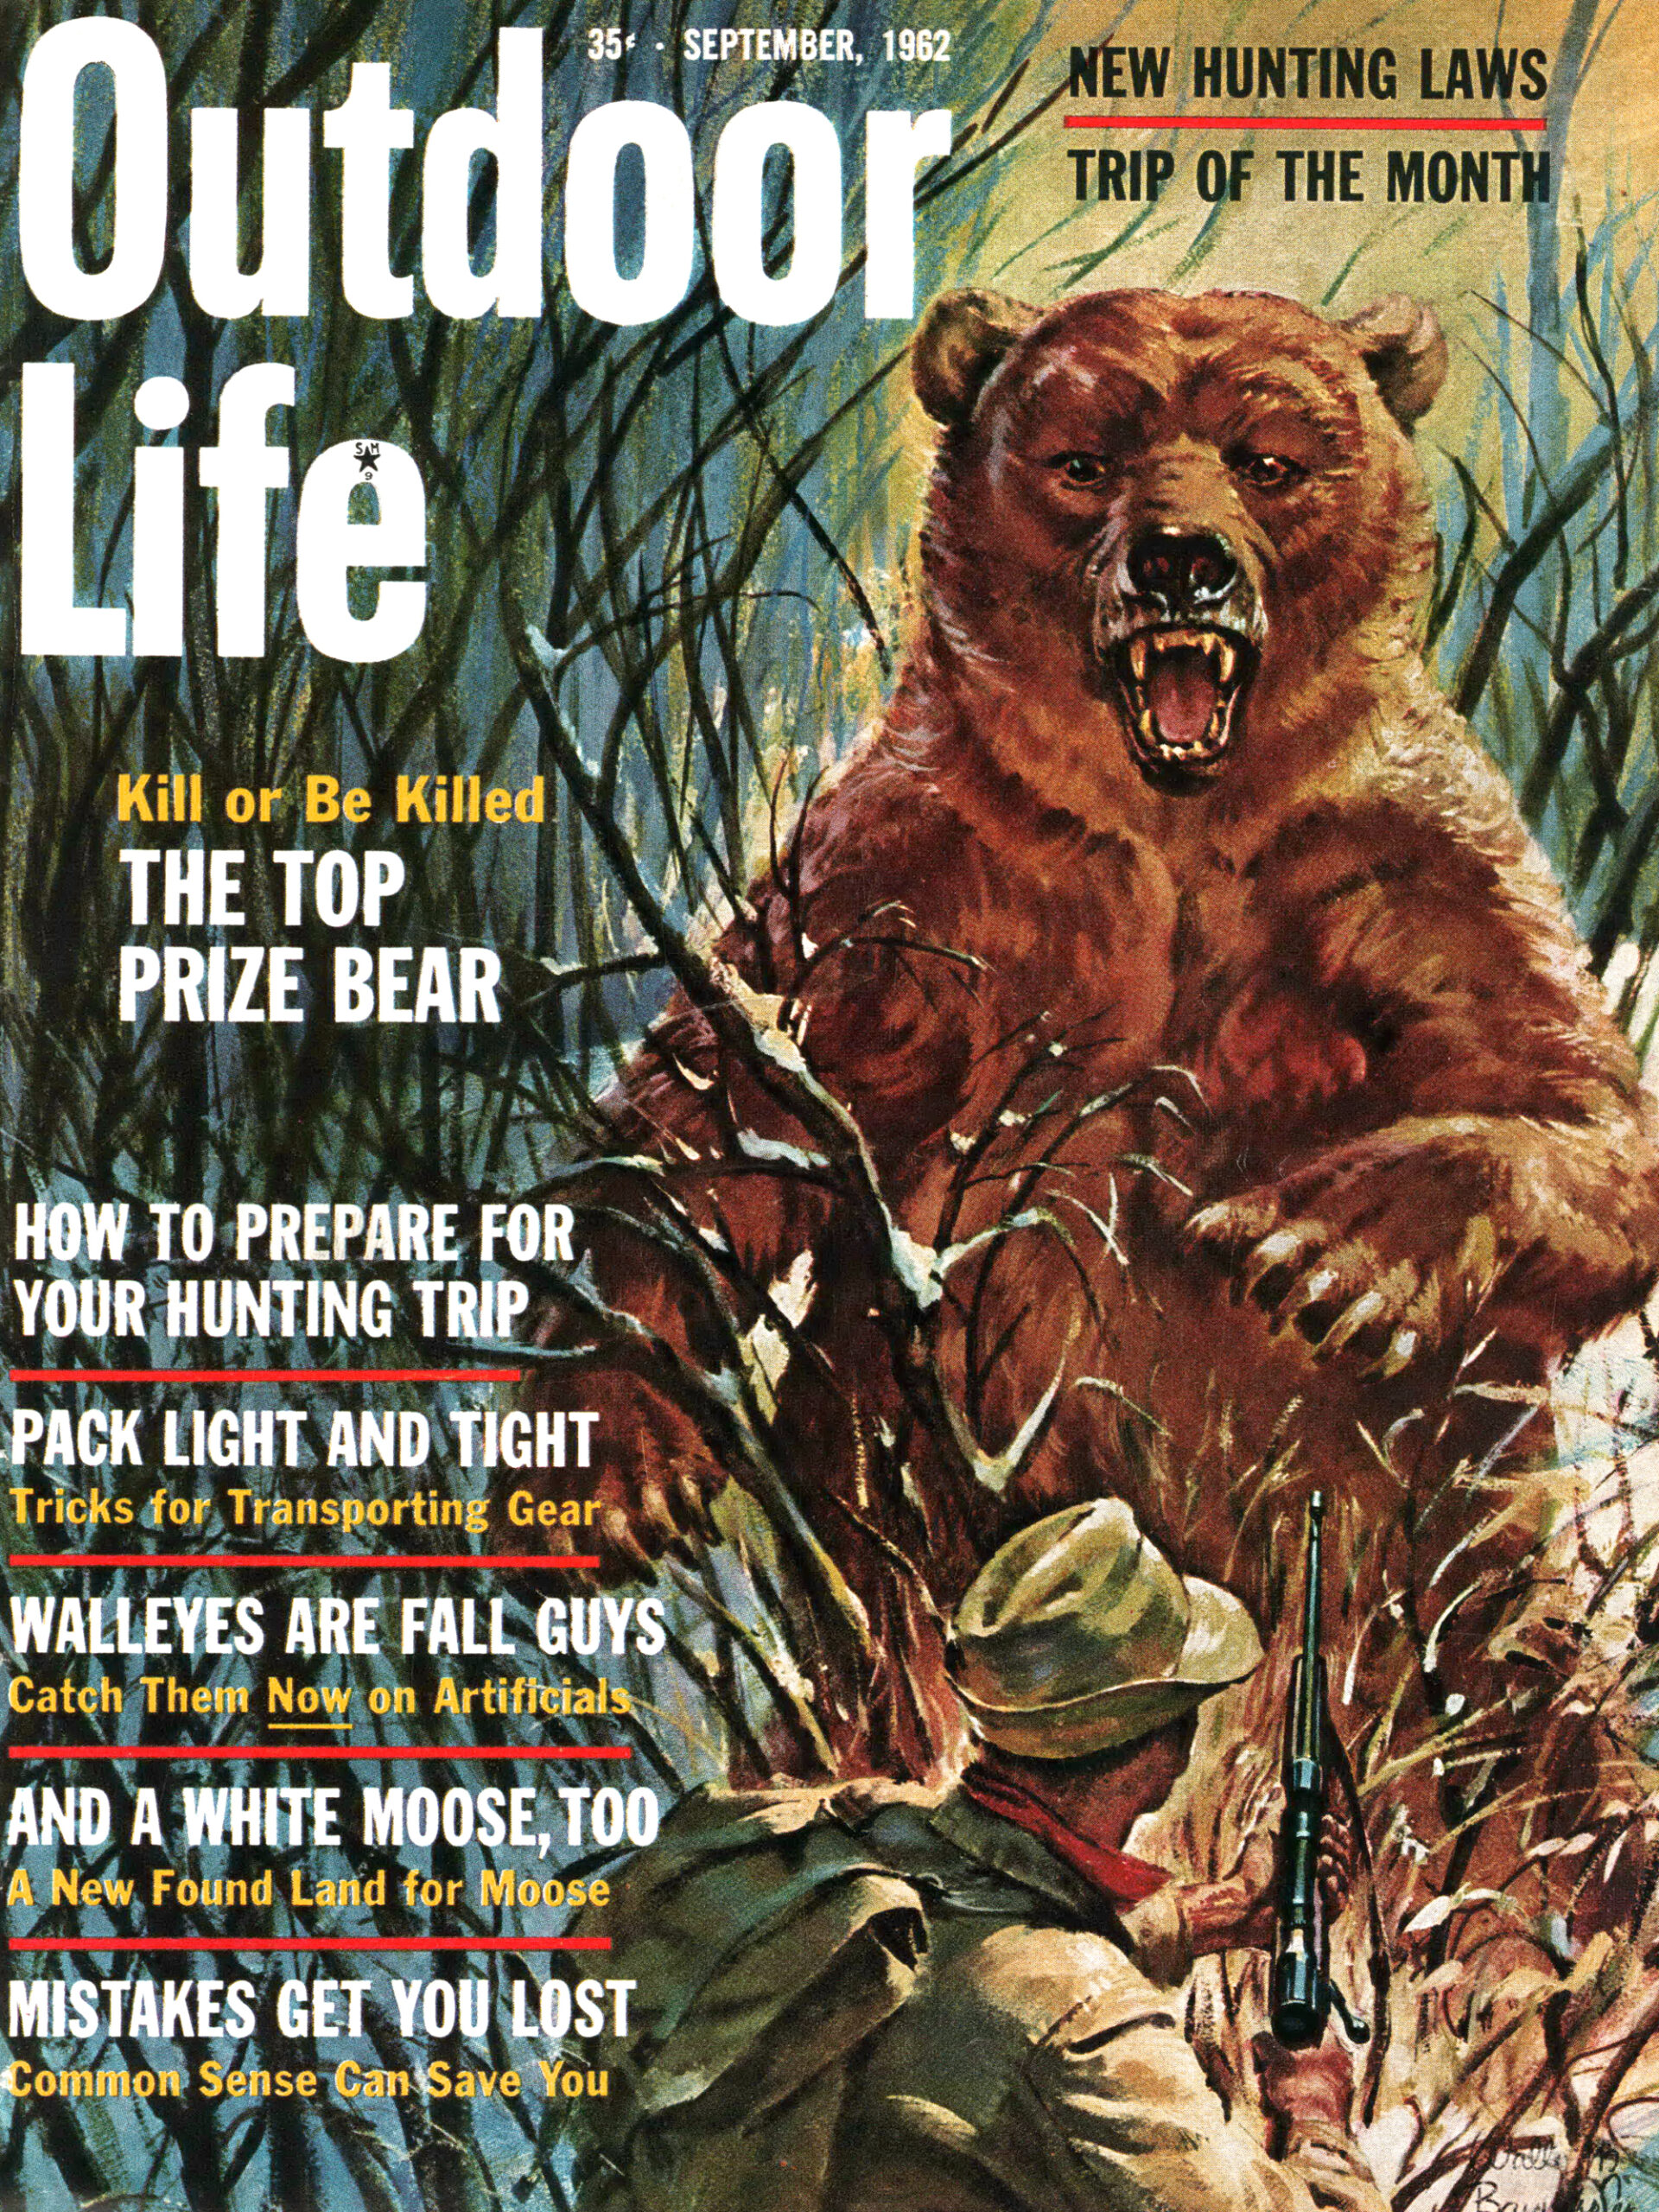 The Sept. 1964 cover of Outdoor Life magazine, featuring a hunter and a brown bear.